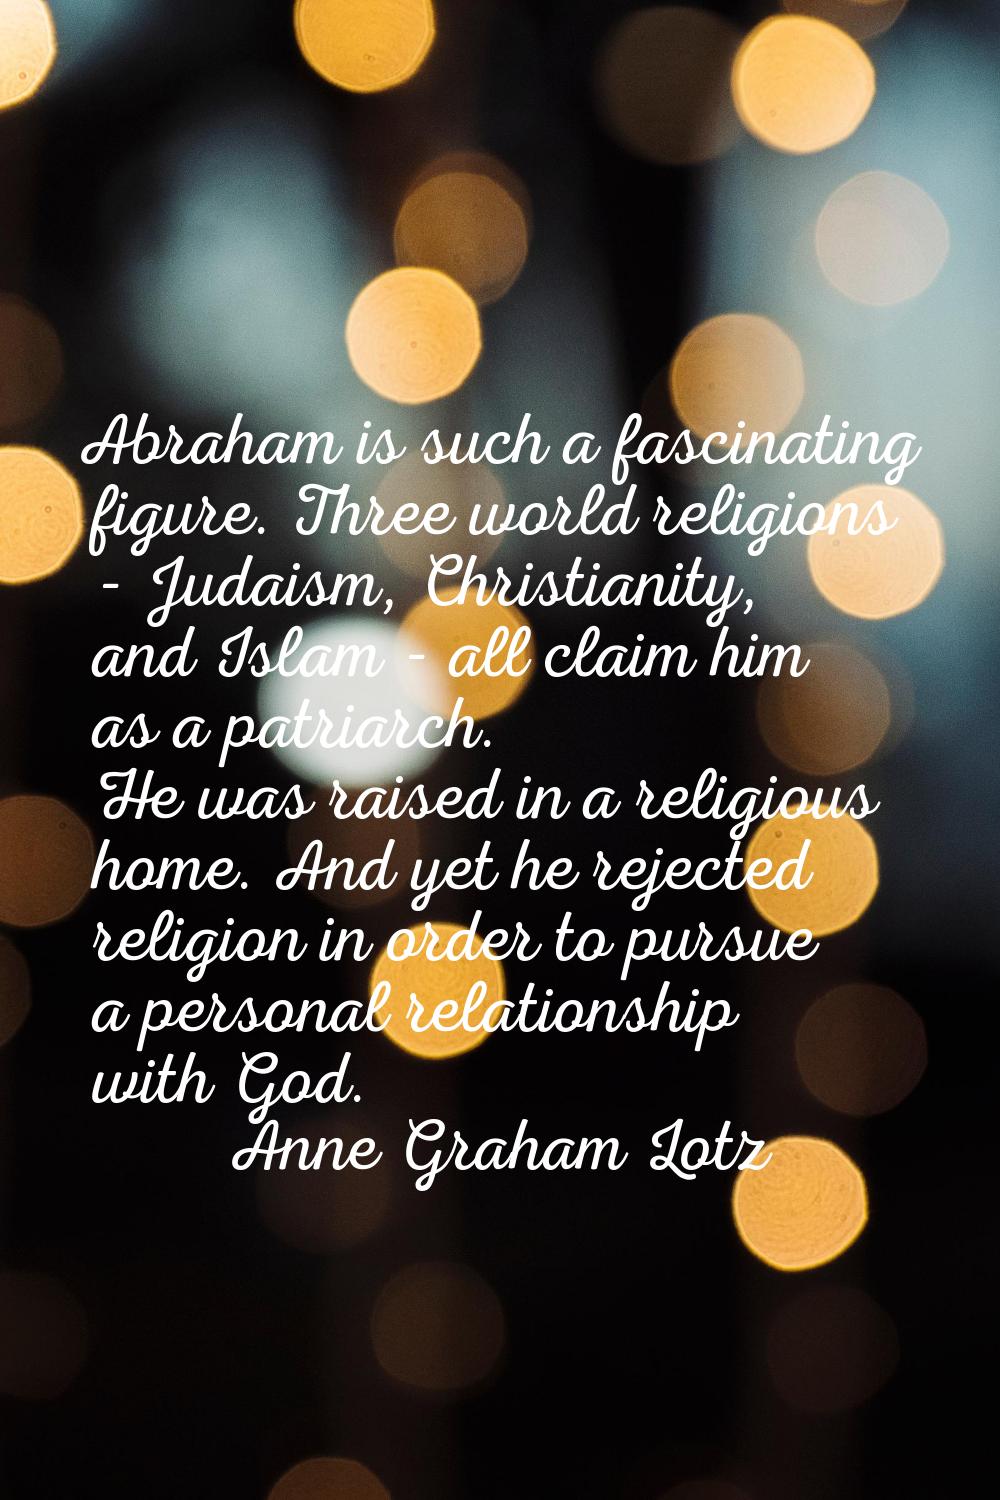 Abraham is such a fascinating figure. Three world religions - Judaism, Christianity, and Islam - al